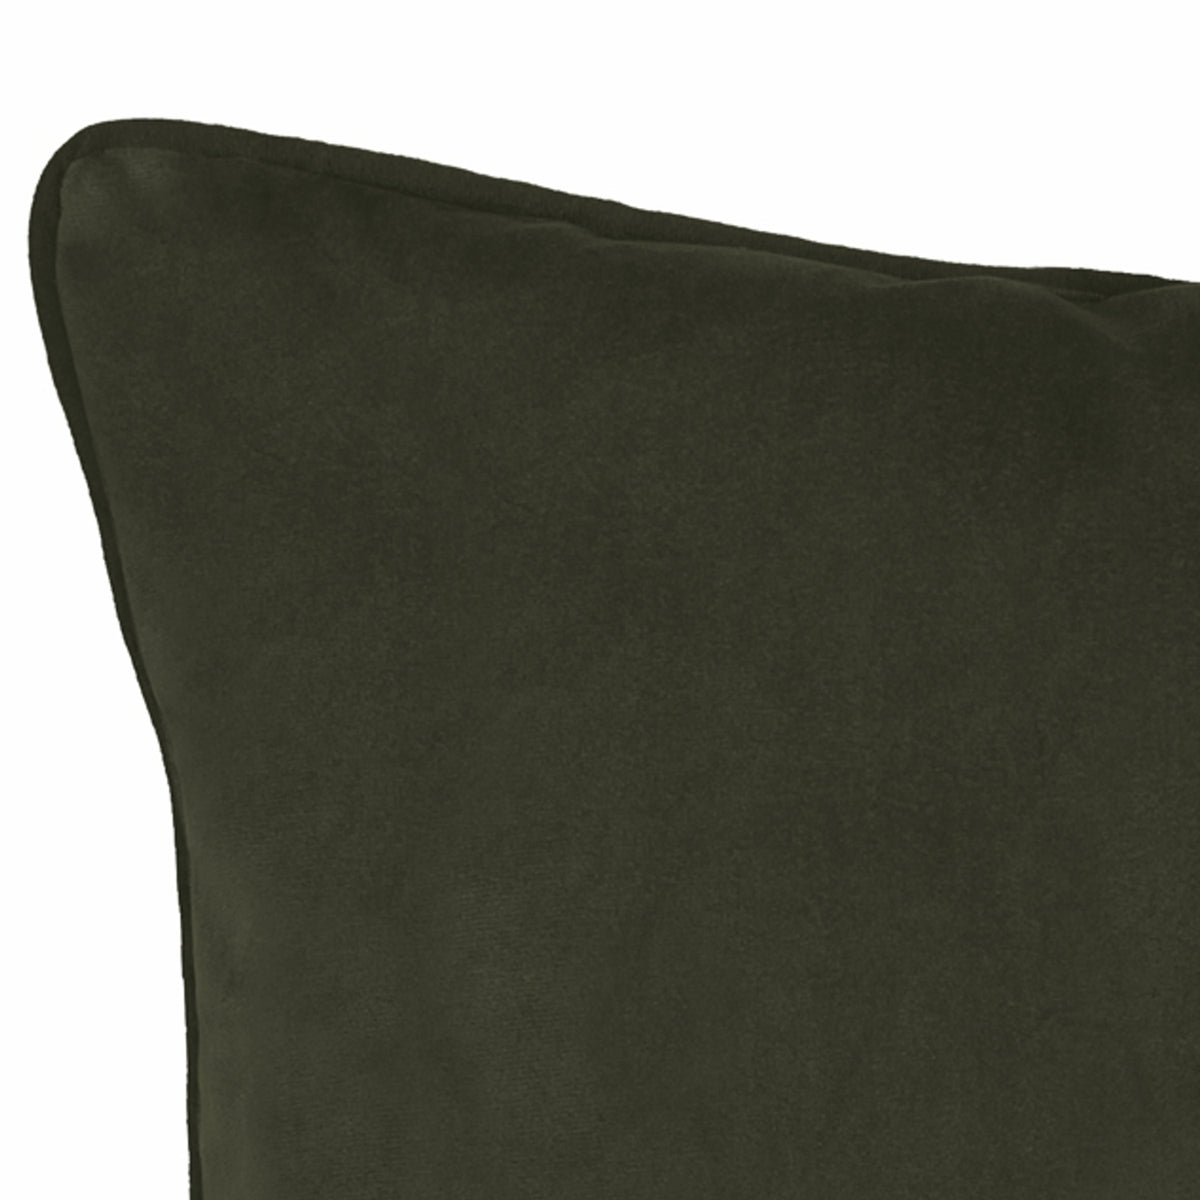 Coussin olive Glory